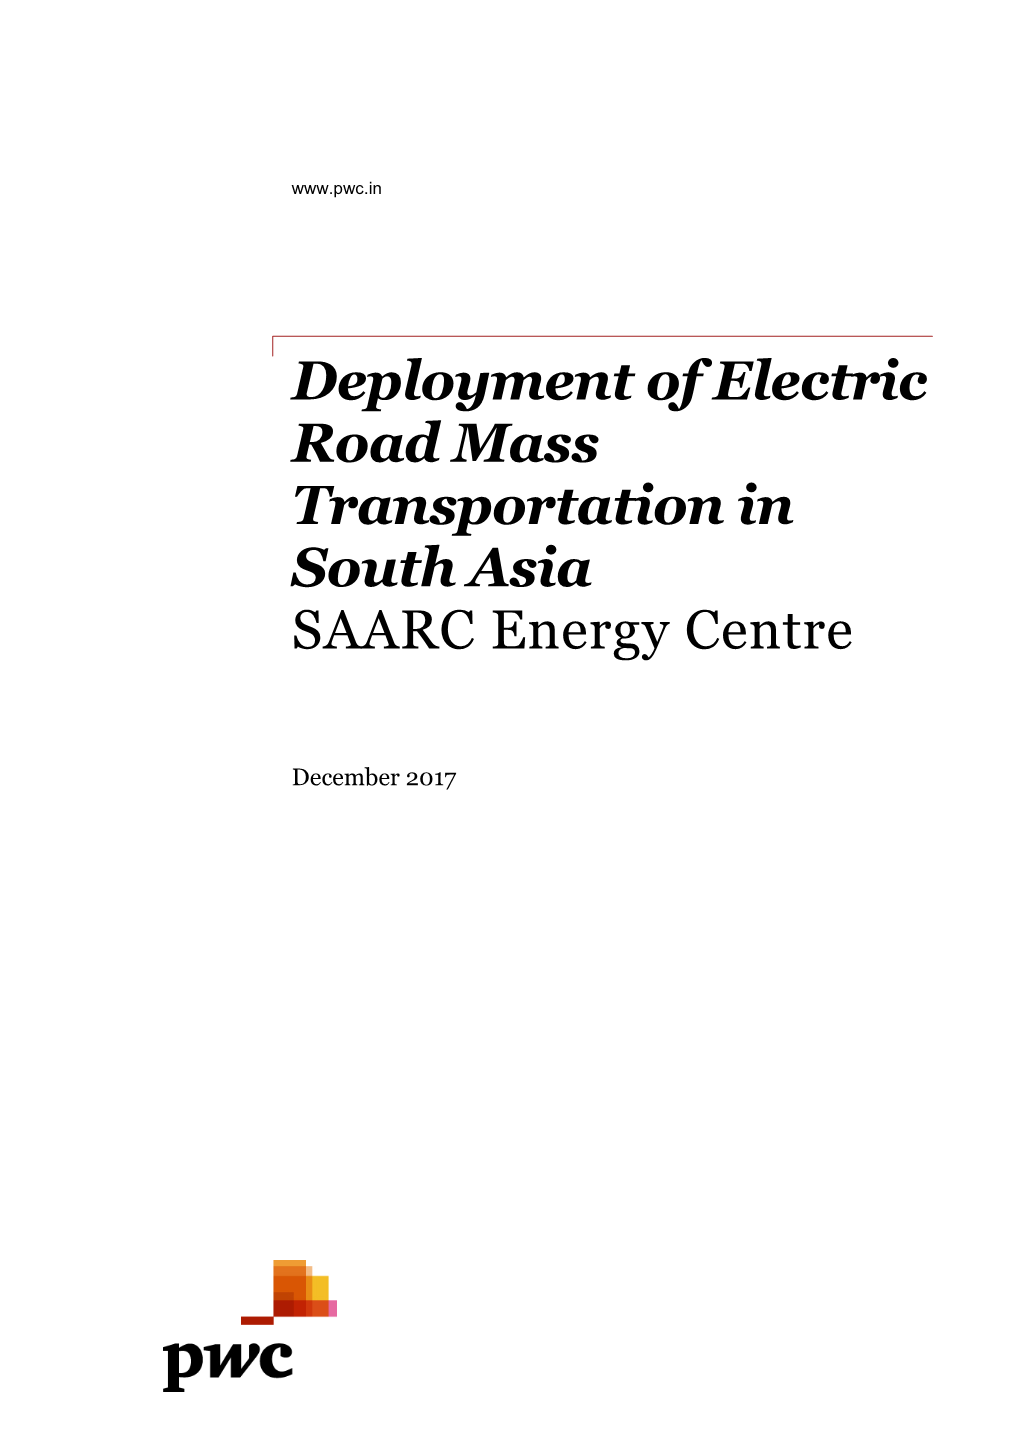 Deployment of Electric Road Mass Transportation in South Asia SAARC Energy Centre